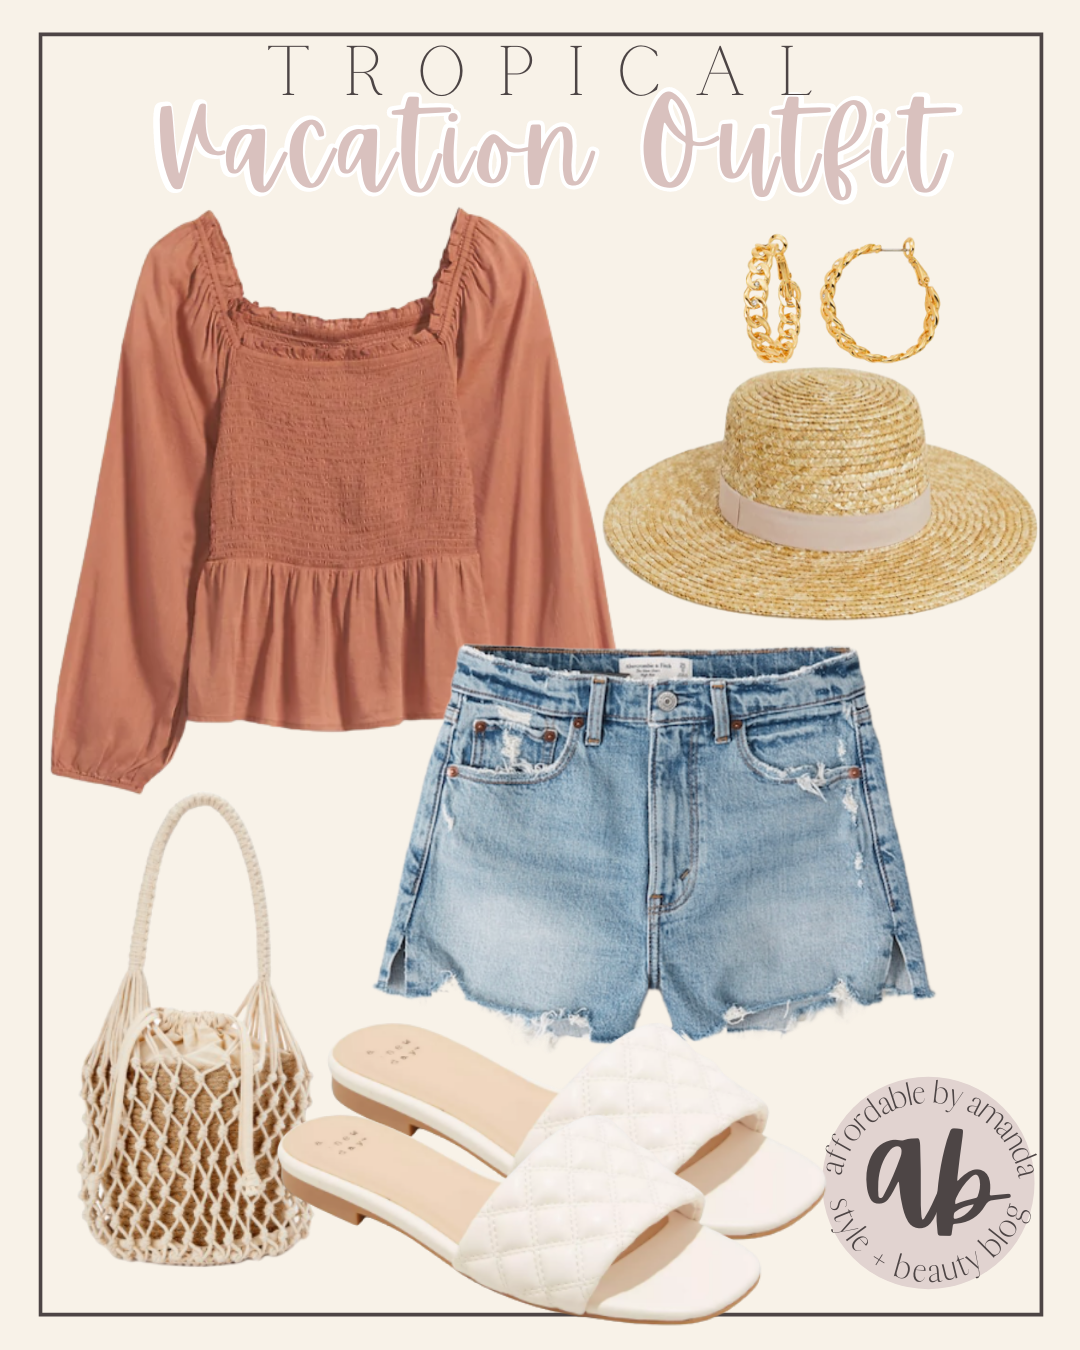 Tropical Vacation Outfit Ideas - Affordable by Amanda